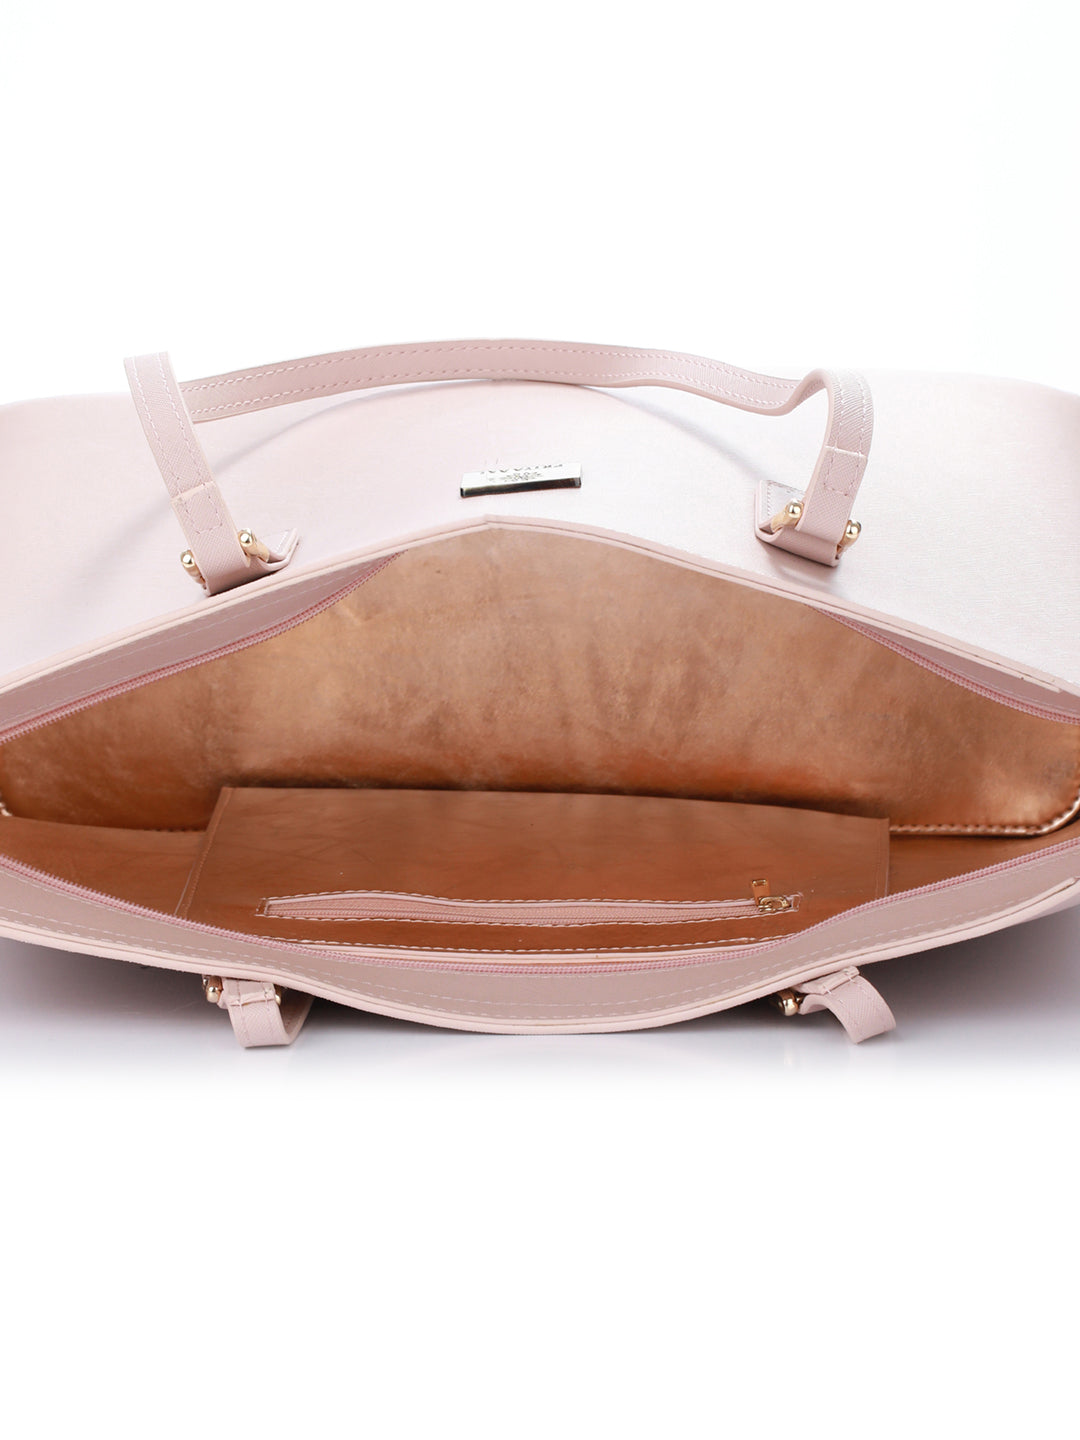 Blush Pink Solid Laptop Sleeve and Tote Bag Set